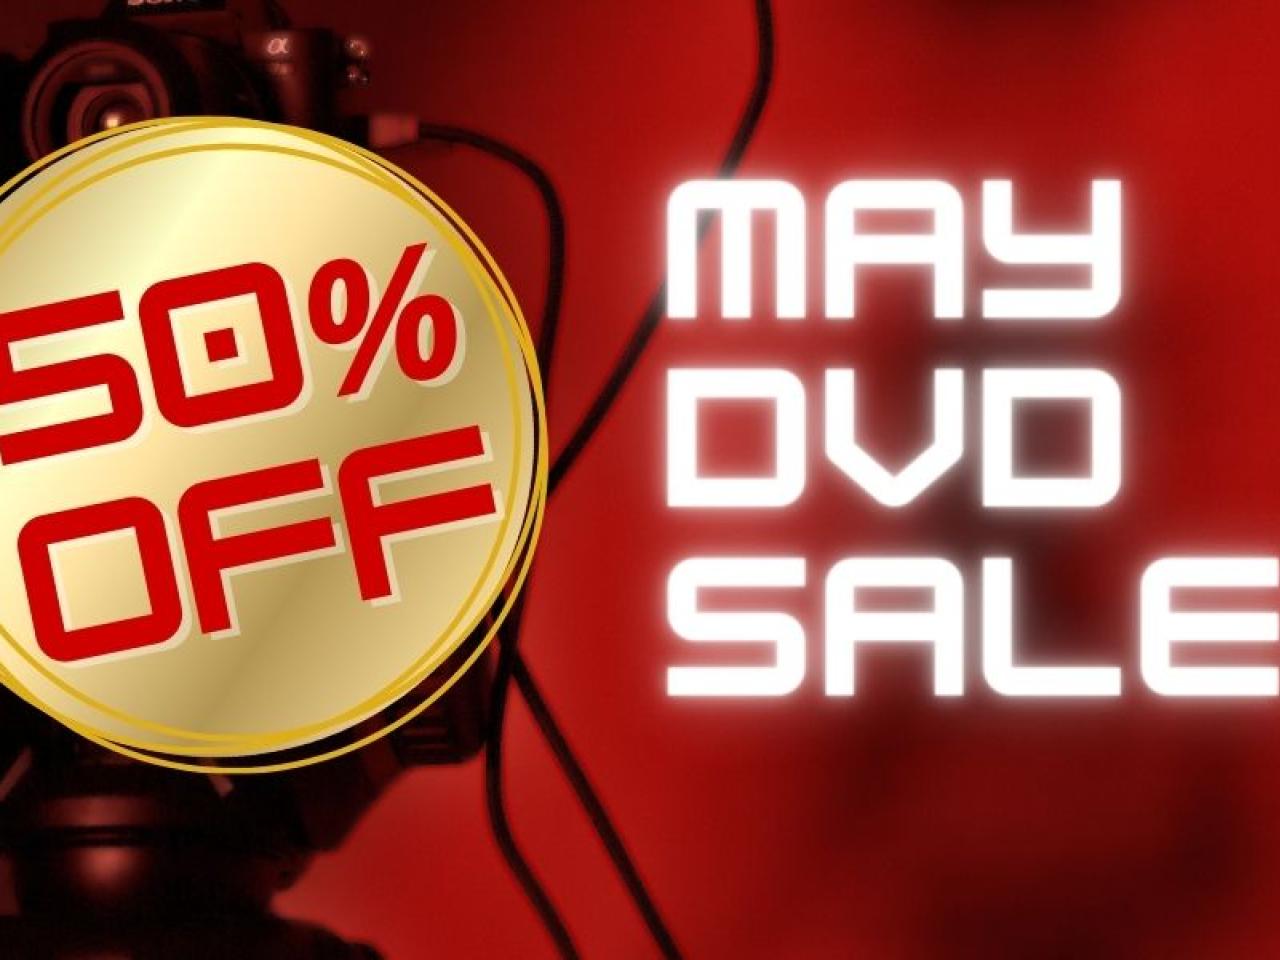 Gold circle with text in red 50% off next to white text that reads may dvd sale! over a red background with black blurred camera image